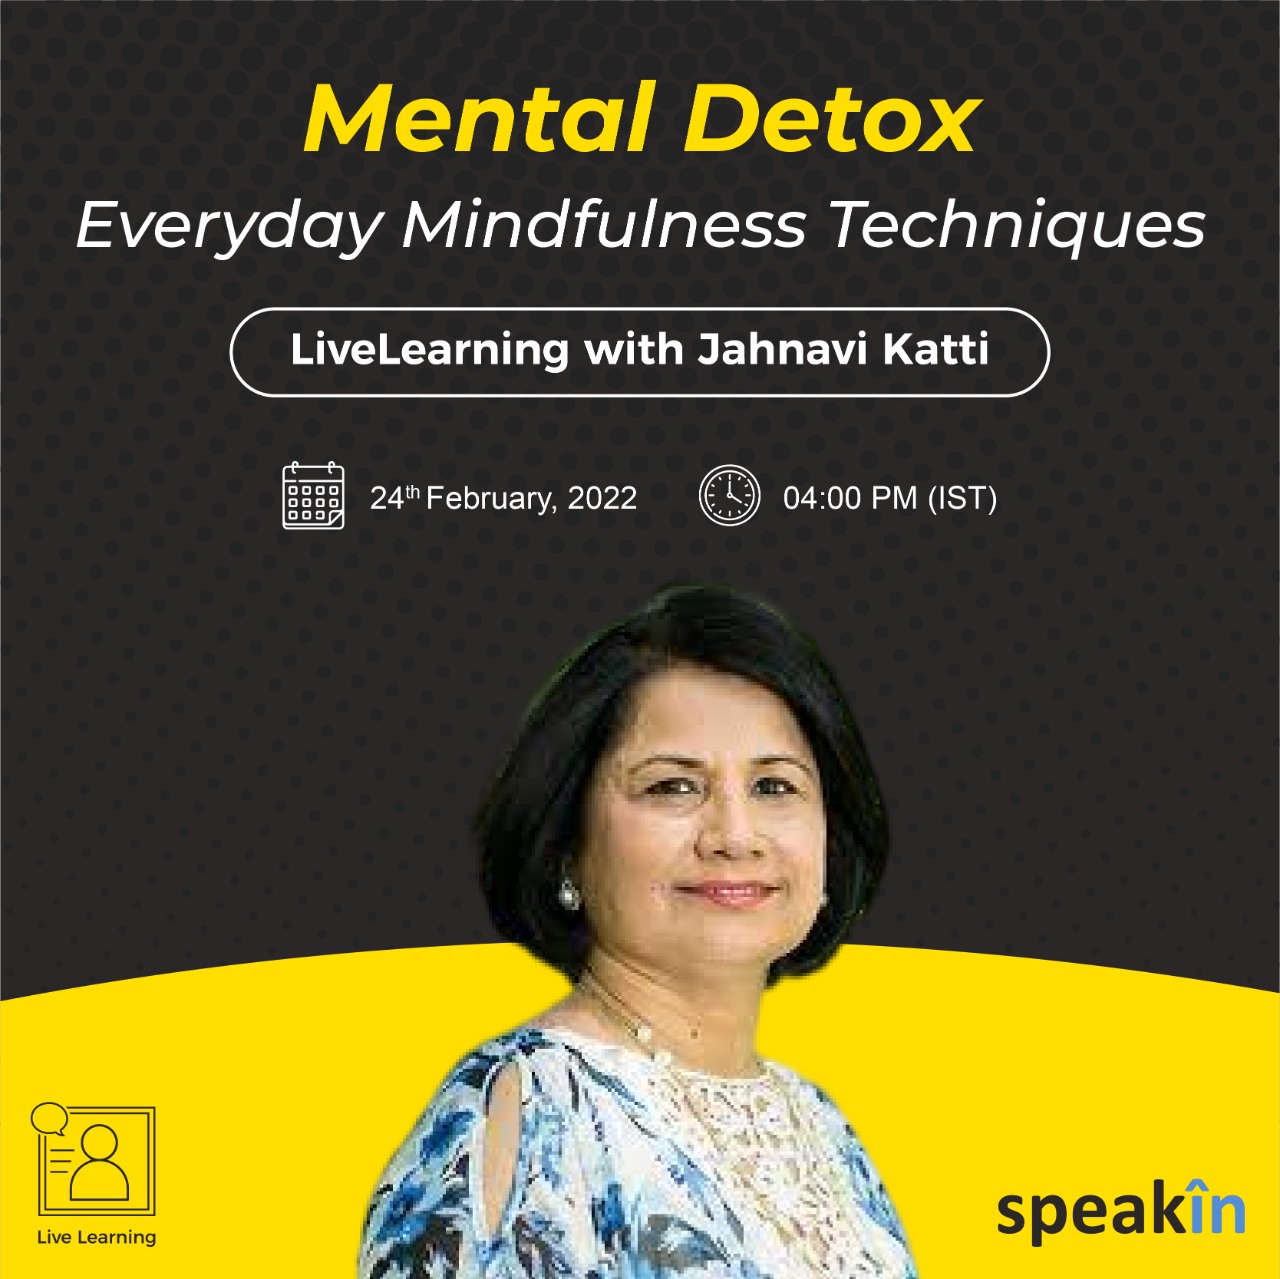 Mental Detox - Everyday Mindfulness Techniques